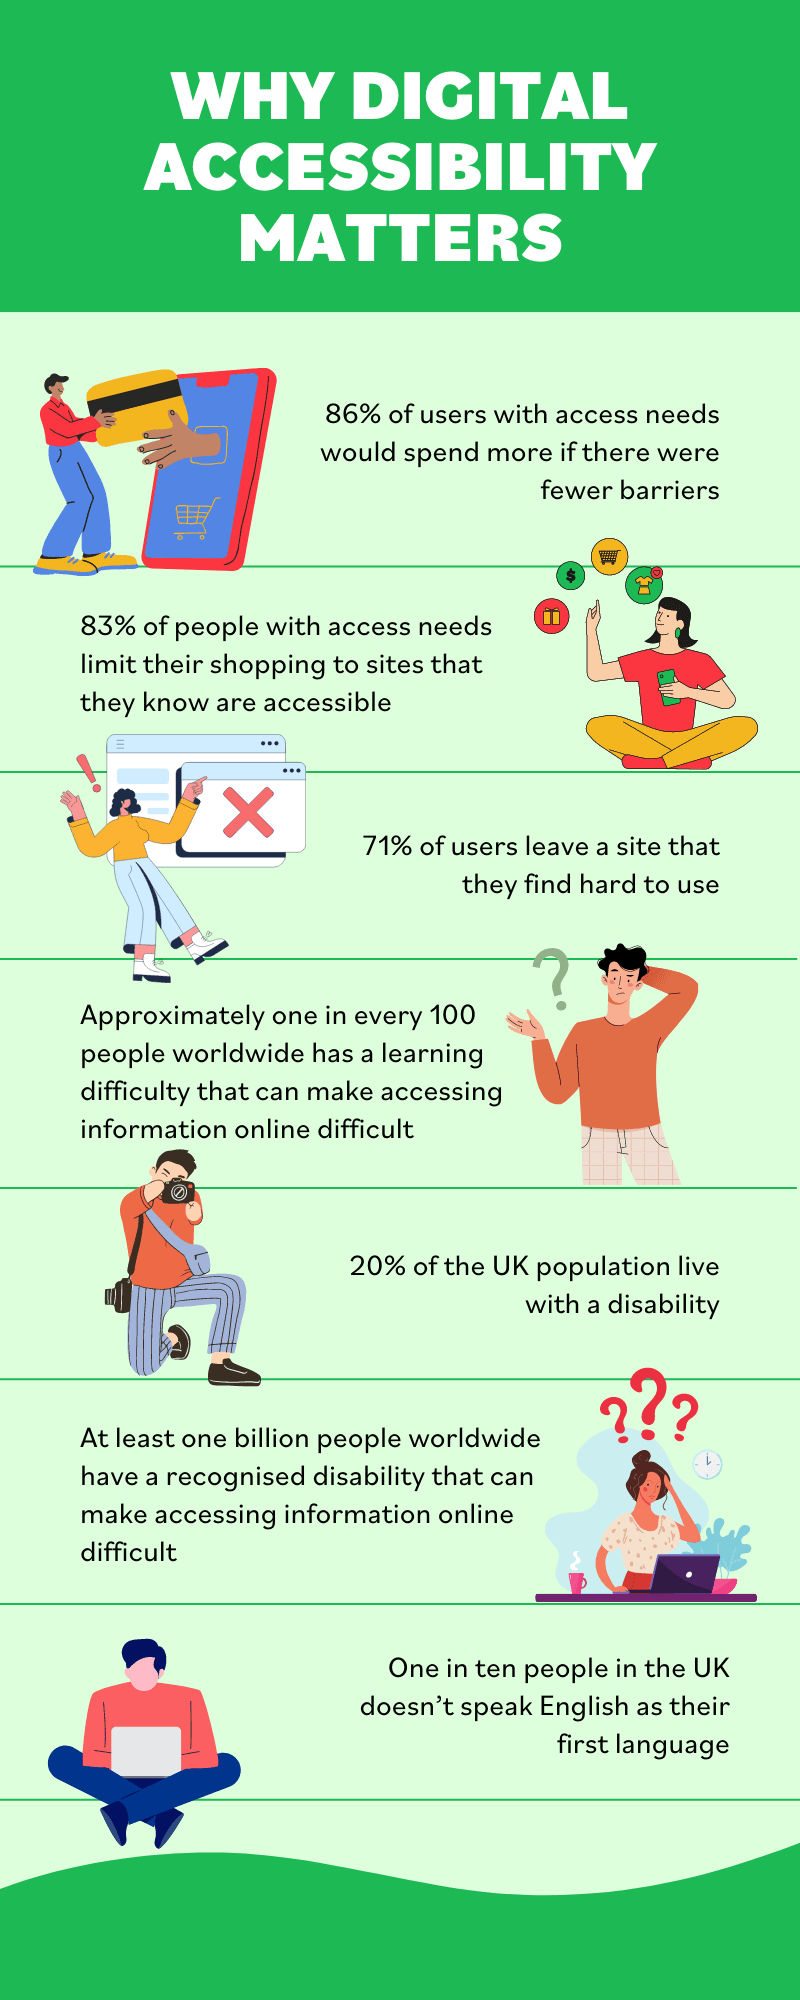 infographic explaining why digital accessibility matters when it comes to creating a business website. 86% of users with access needs would spend more if there were fewer barriers; 83% of people with access needs limit their shopping to sites that they know are accessible; 71% of users leave a site that they find hard to use; Approximately one in every 100 people worldwide has a learning difficulty that can make accessing information online difficult; At least one billion people worldwide have a recognised disability that can make accessing information online difficult; 20% of the UK population live with a disability; One in ten people in the UK doesn’t speak English as their first language 